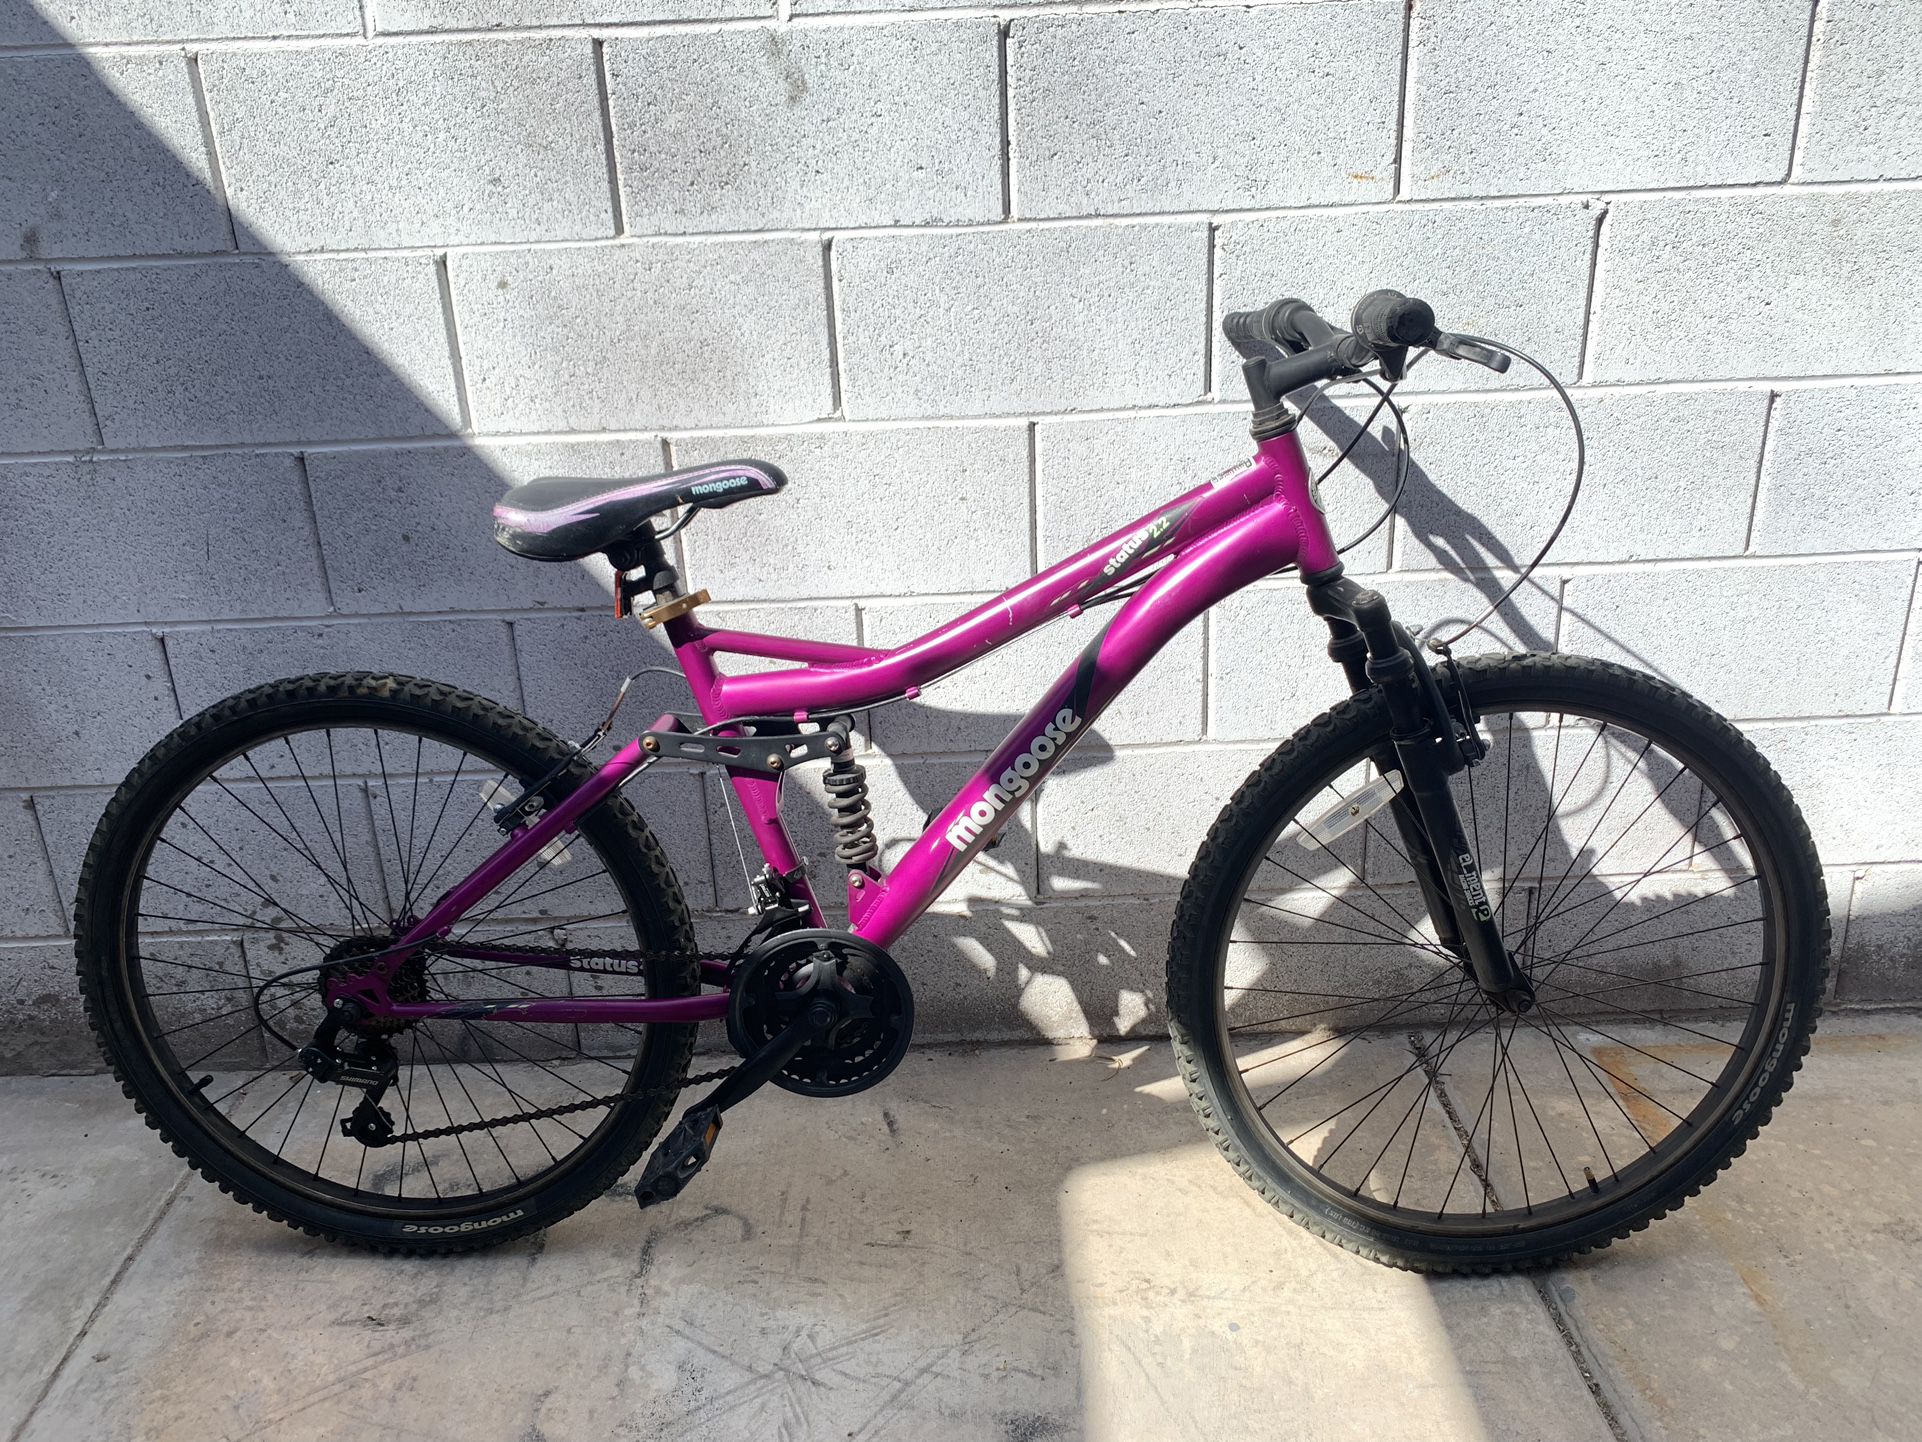 Adults Mongoose Bike Bicycle 26inch Rims 21 Speed Full Suspension New Inner Tubes Ready To Ride 